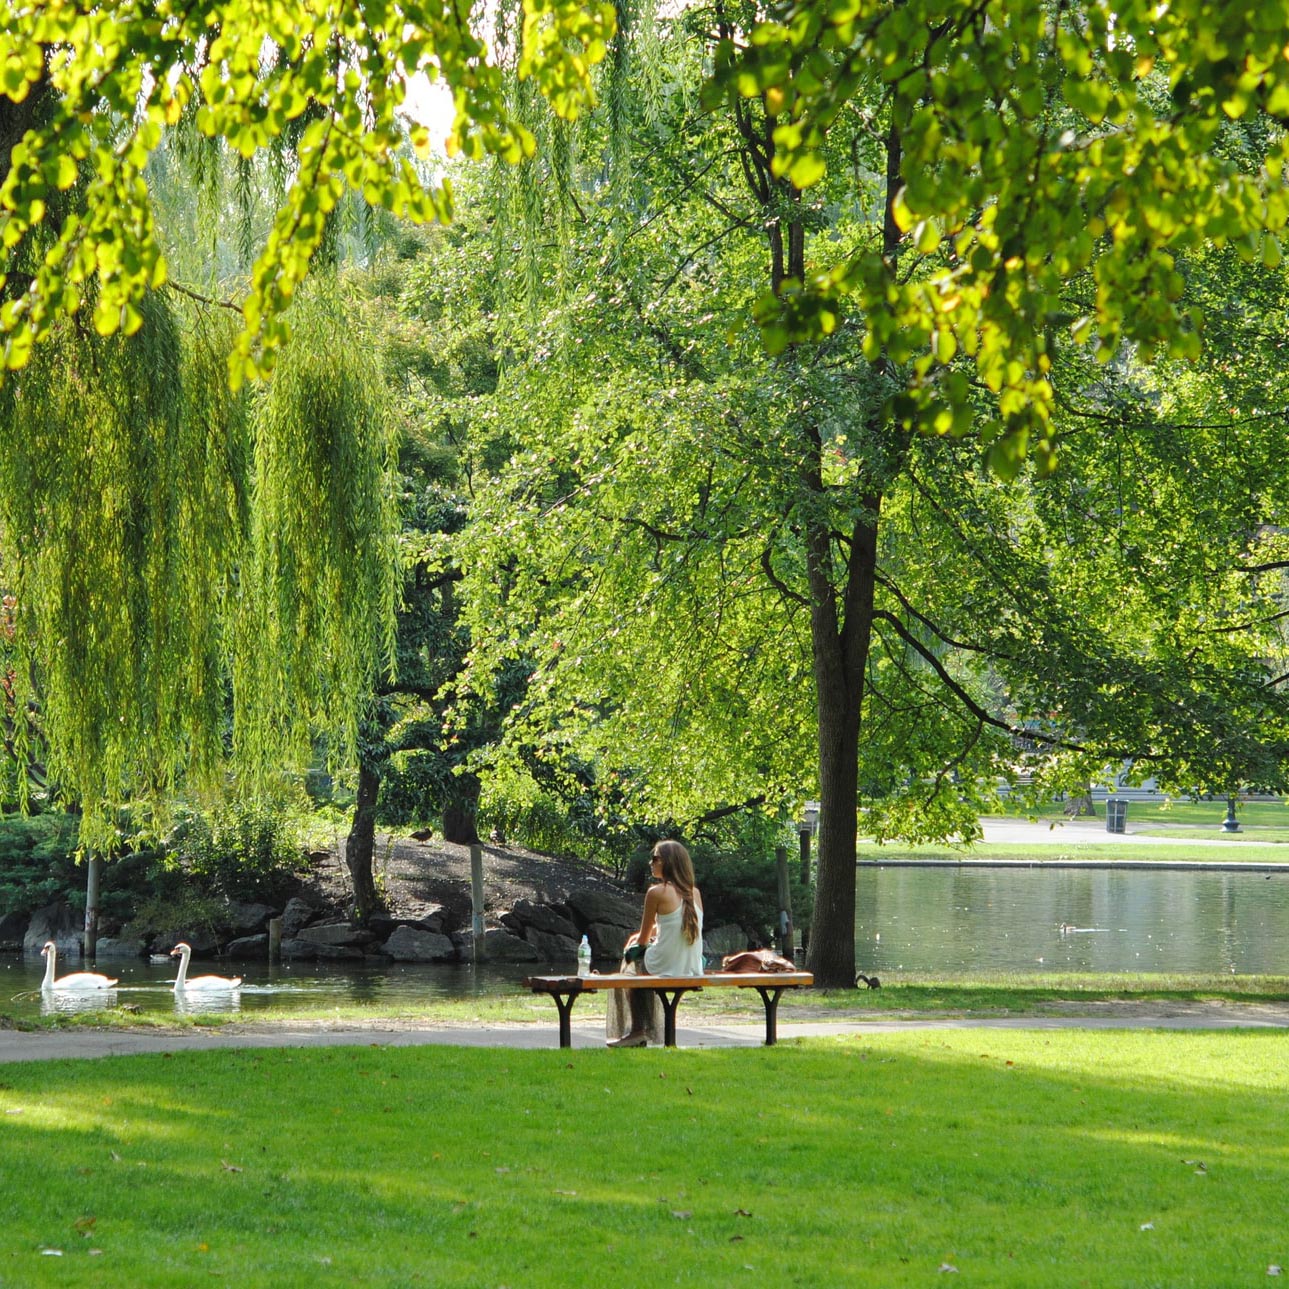 Woman sitting on a bench in a park in summer